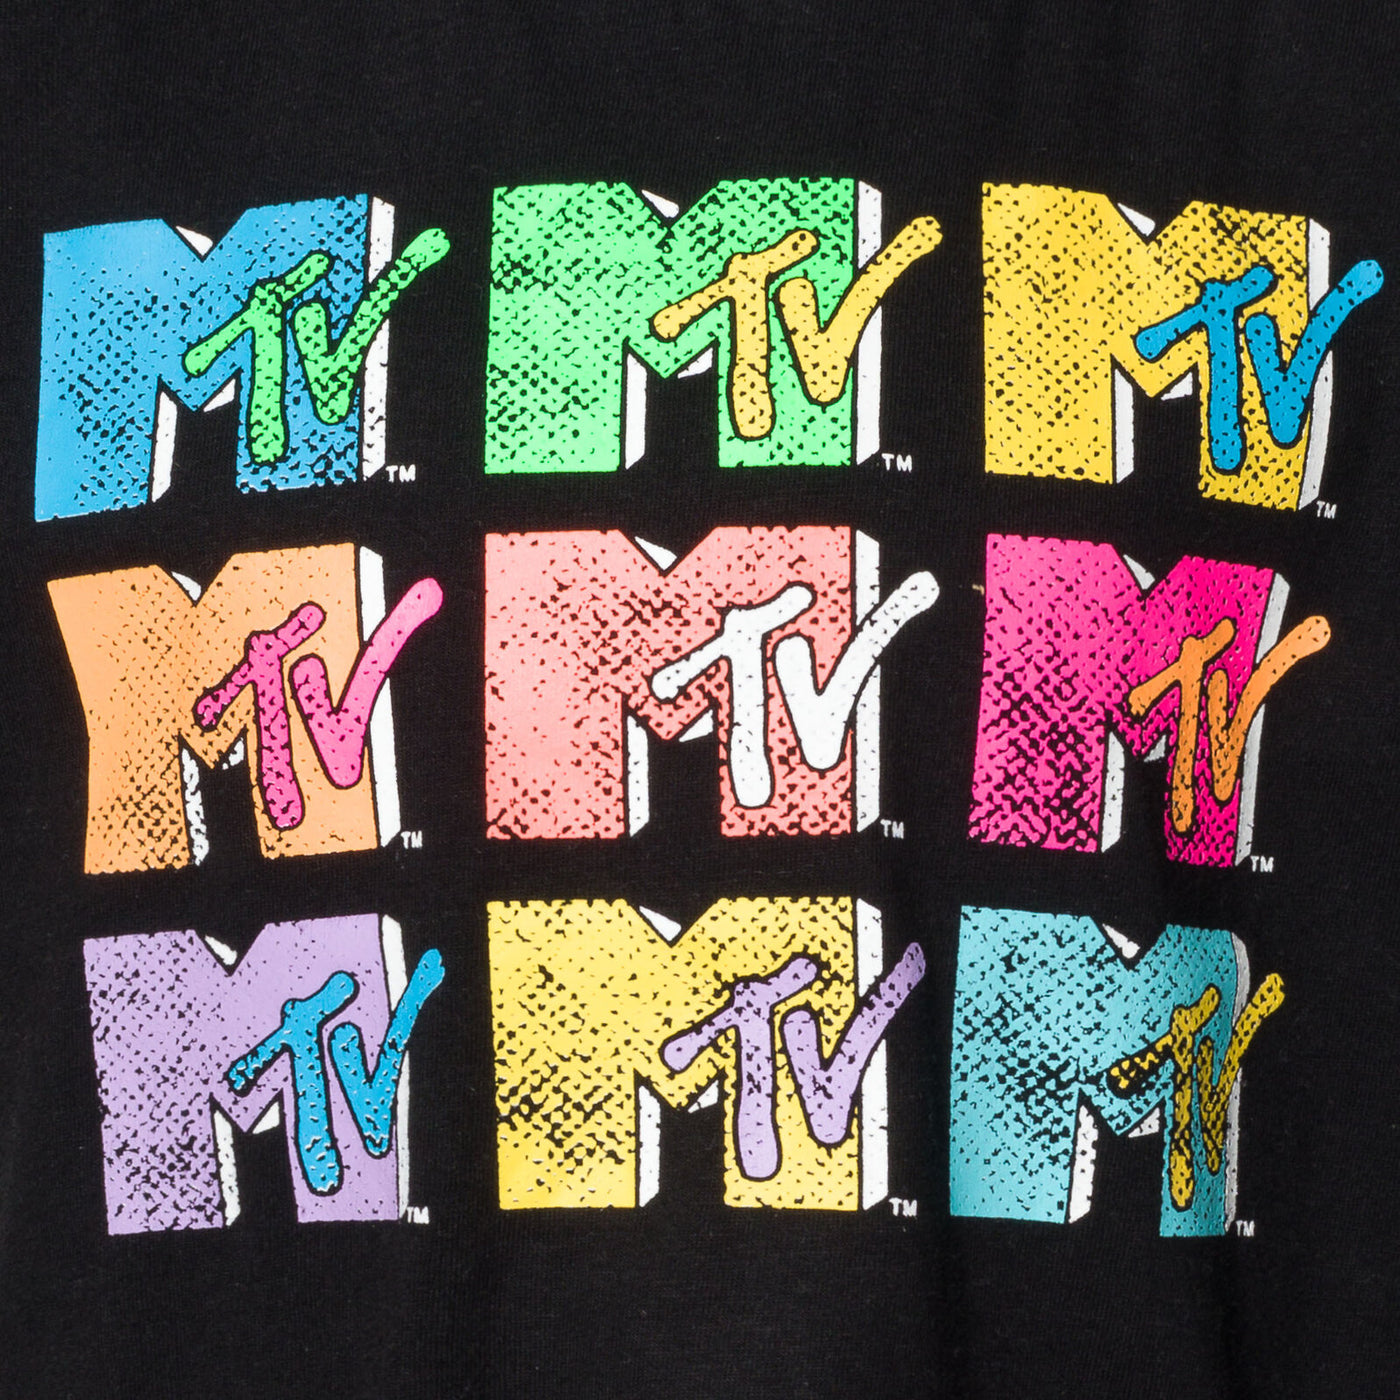 MTV 2 Pack Graphic T-Shirts